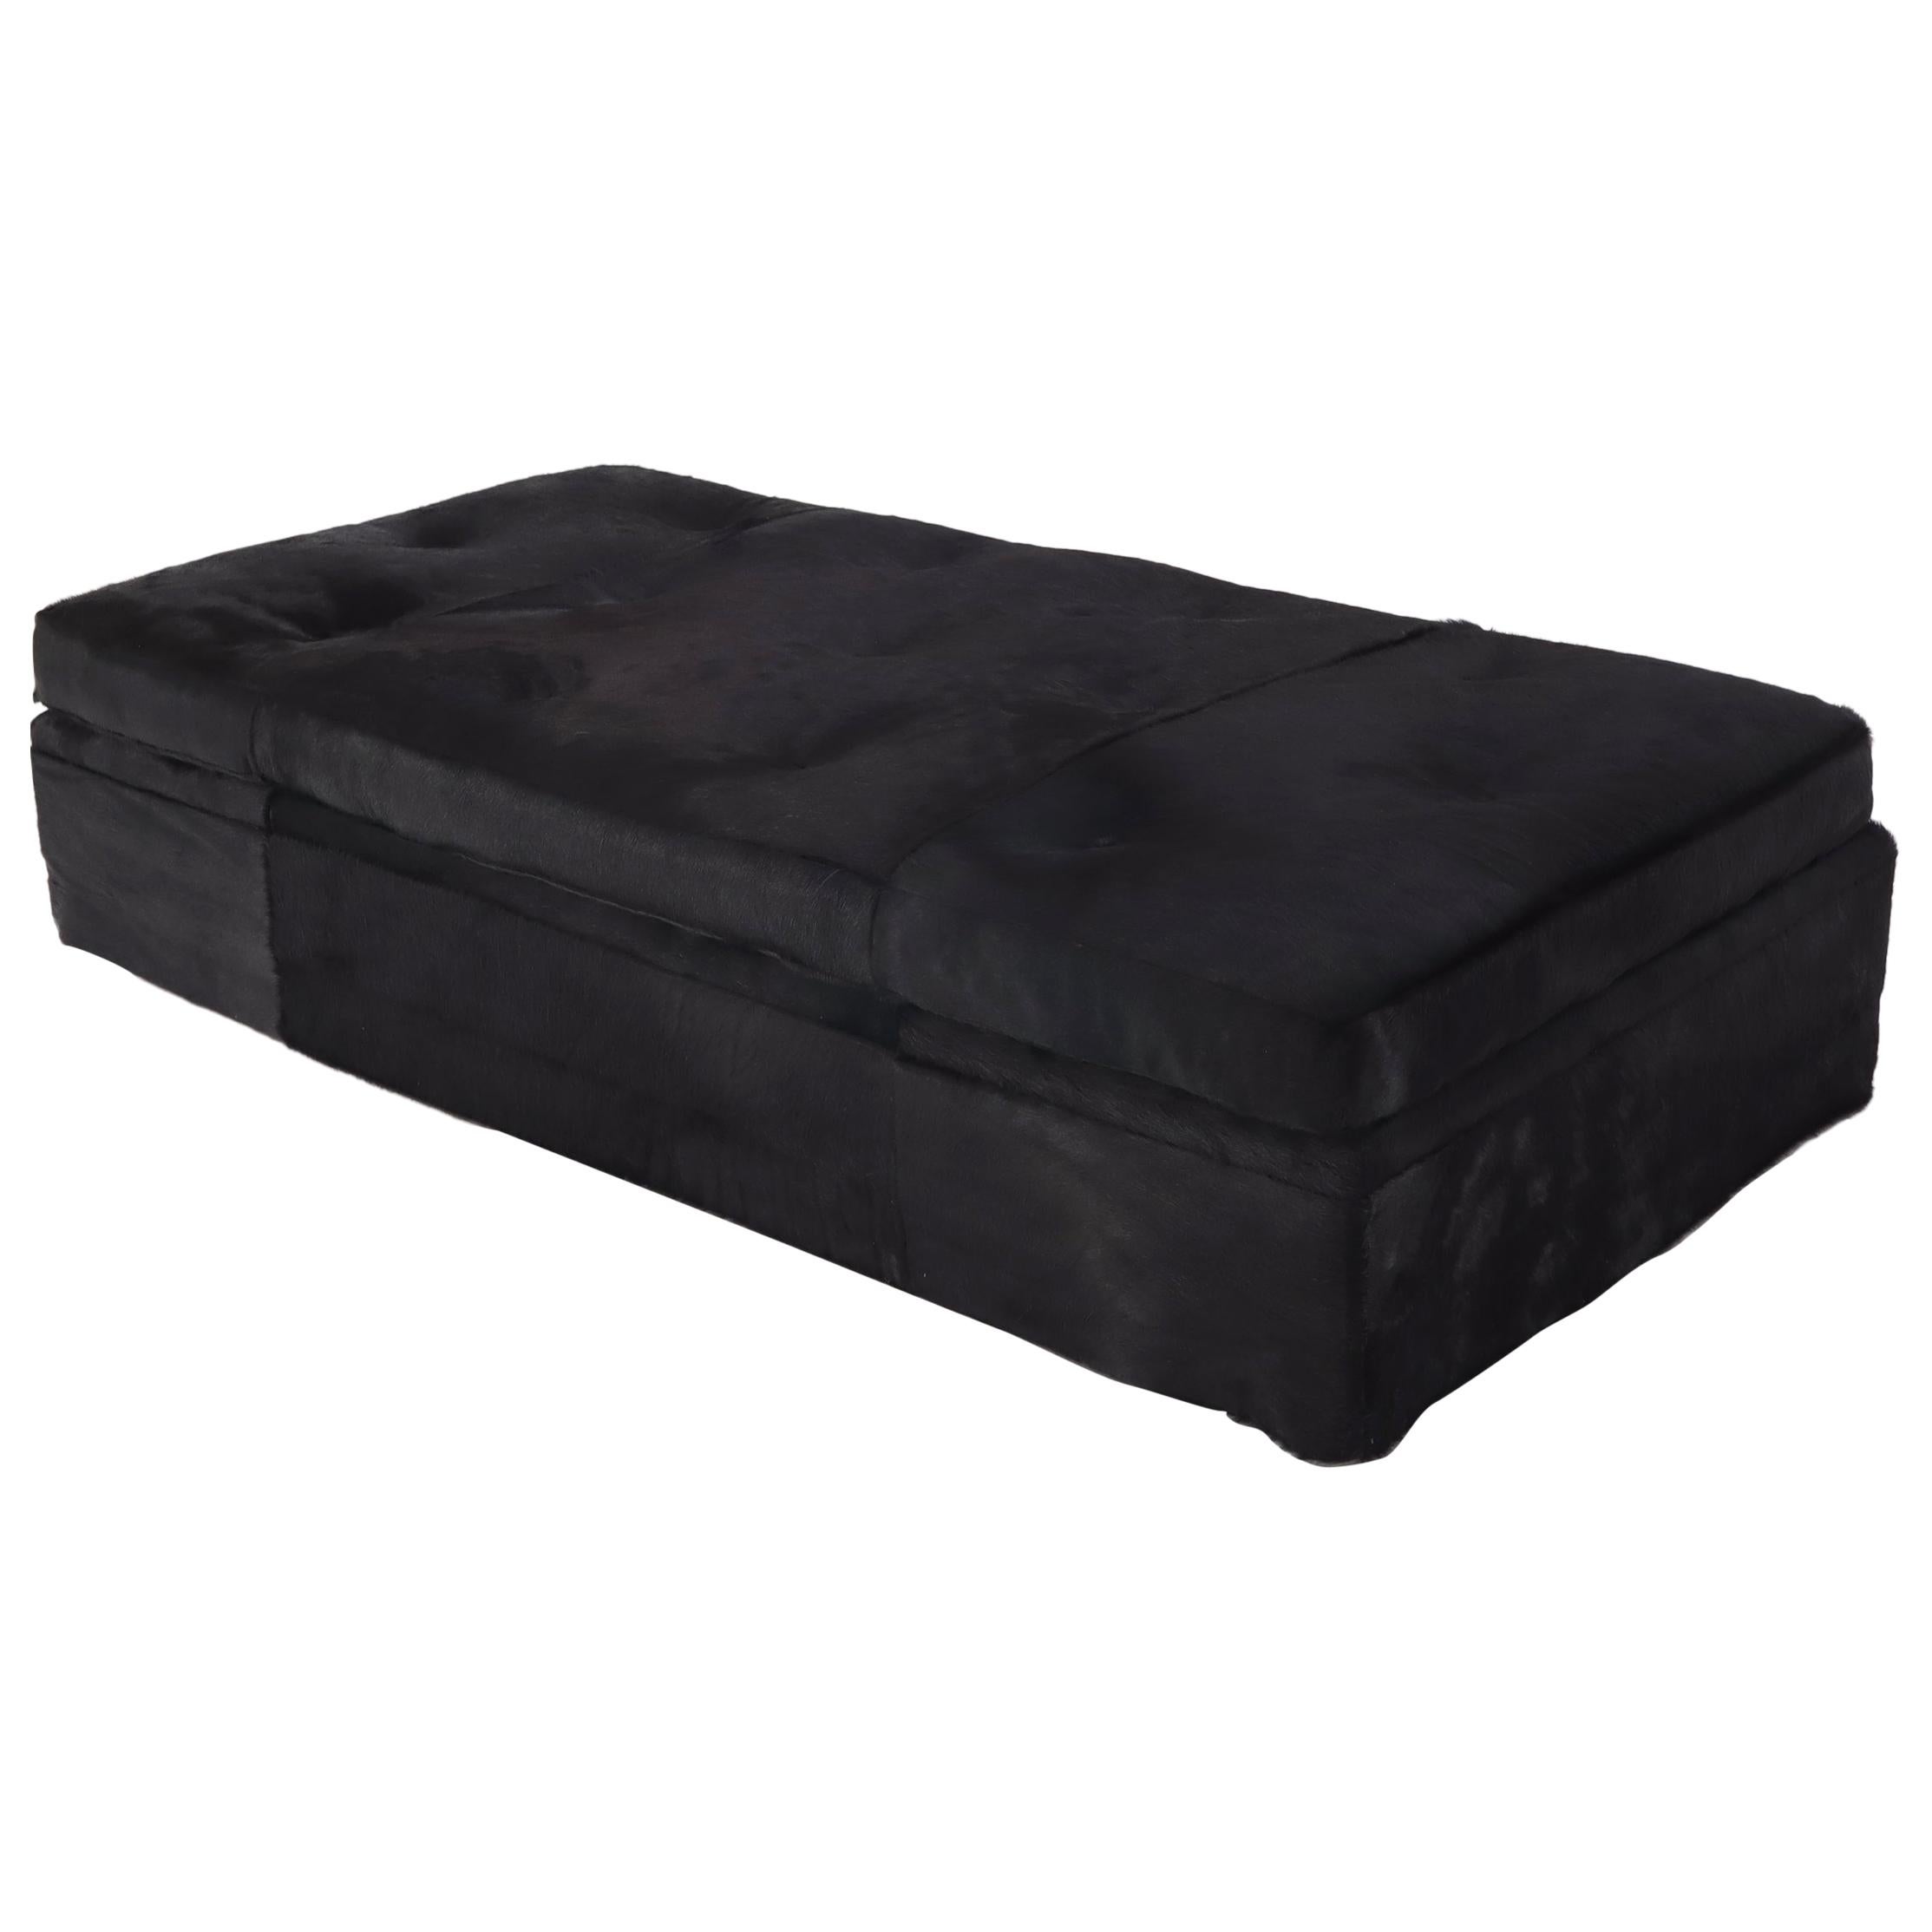 All Black Cowhide Fur Upholstery Custom Daybed Large Bench For Sale